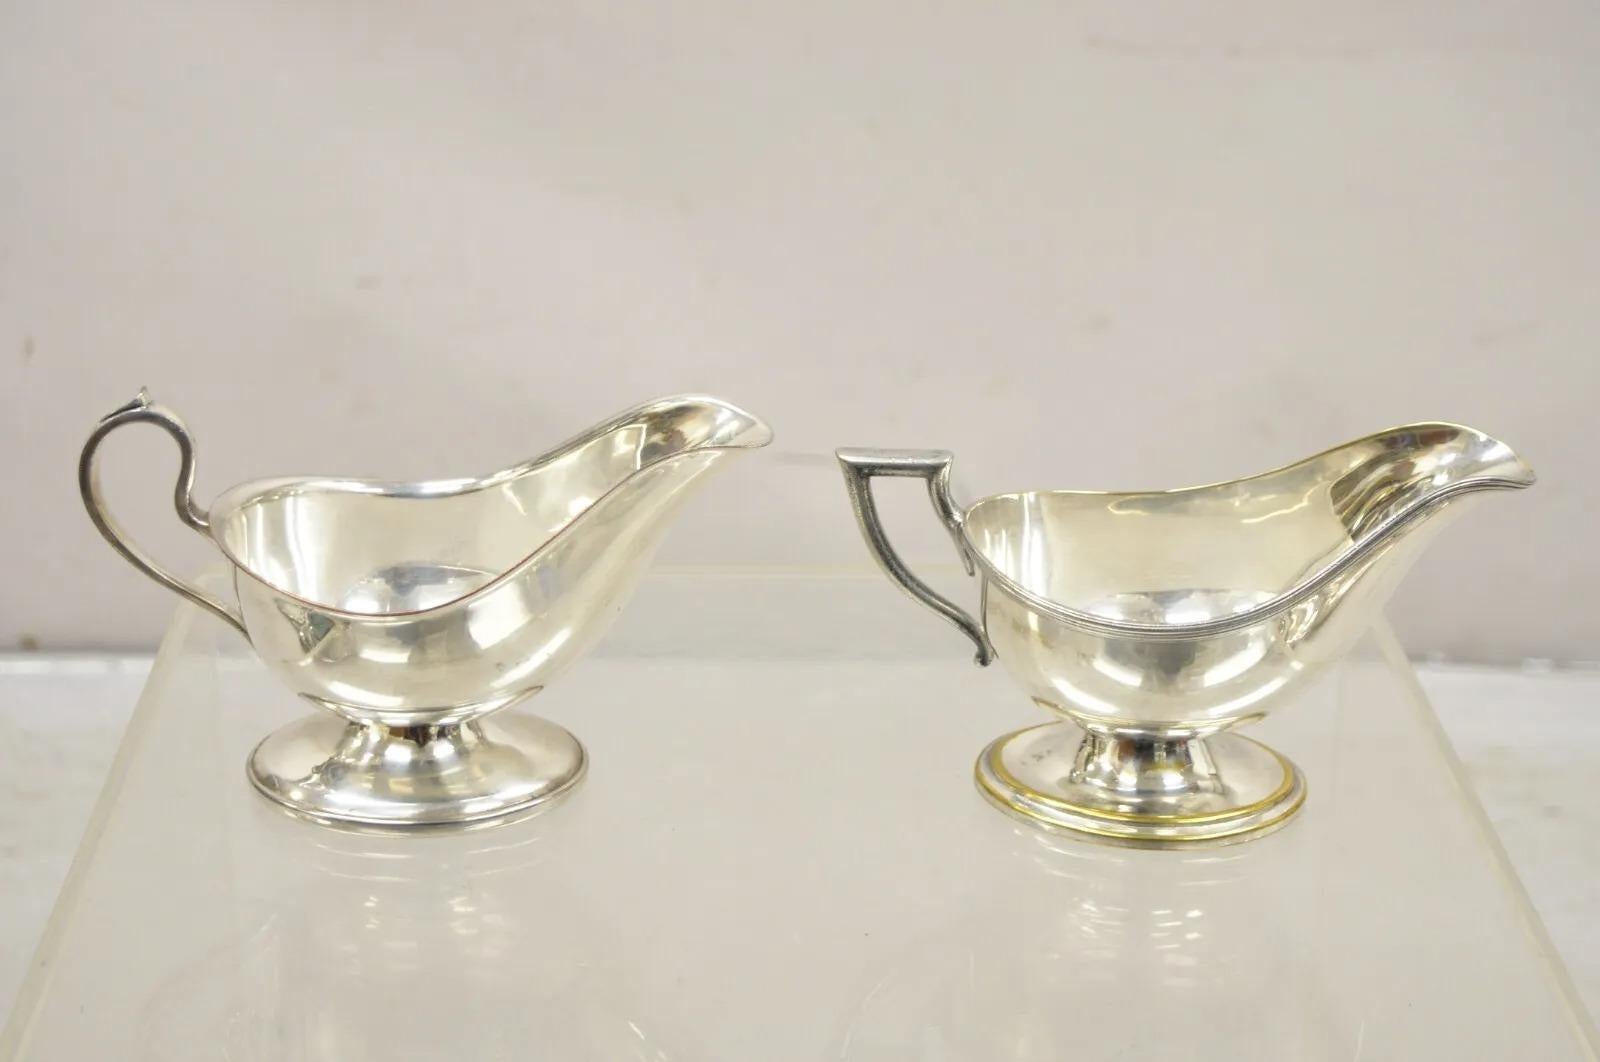 Vintage Silver Plated Victorian Serving Gravy Boat Sauce Boats - Lot of 6 For Sale 4